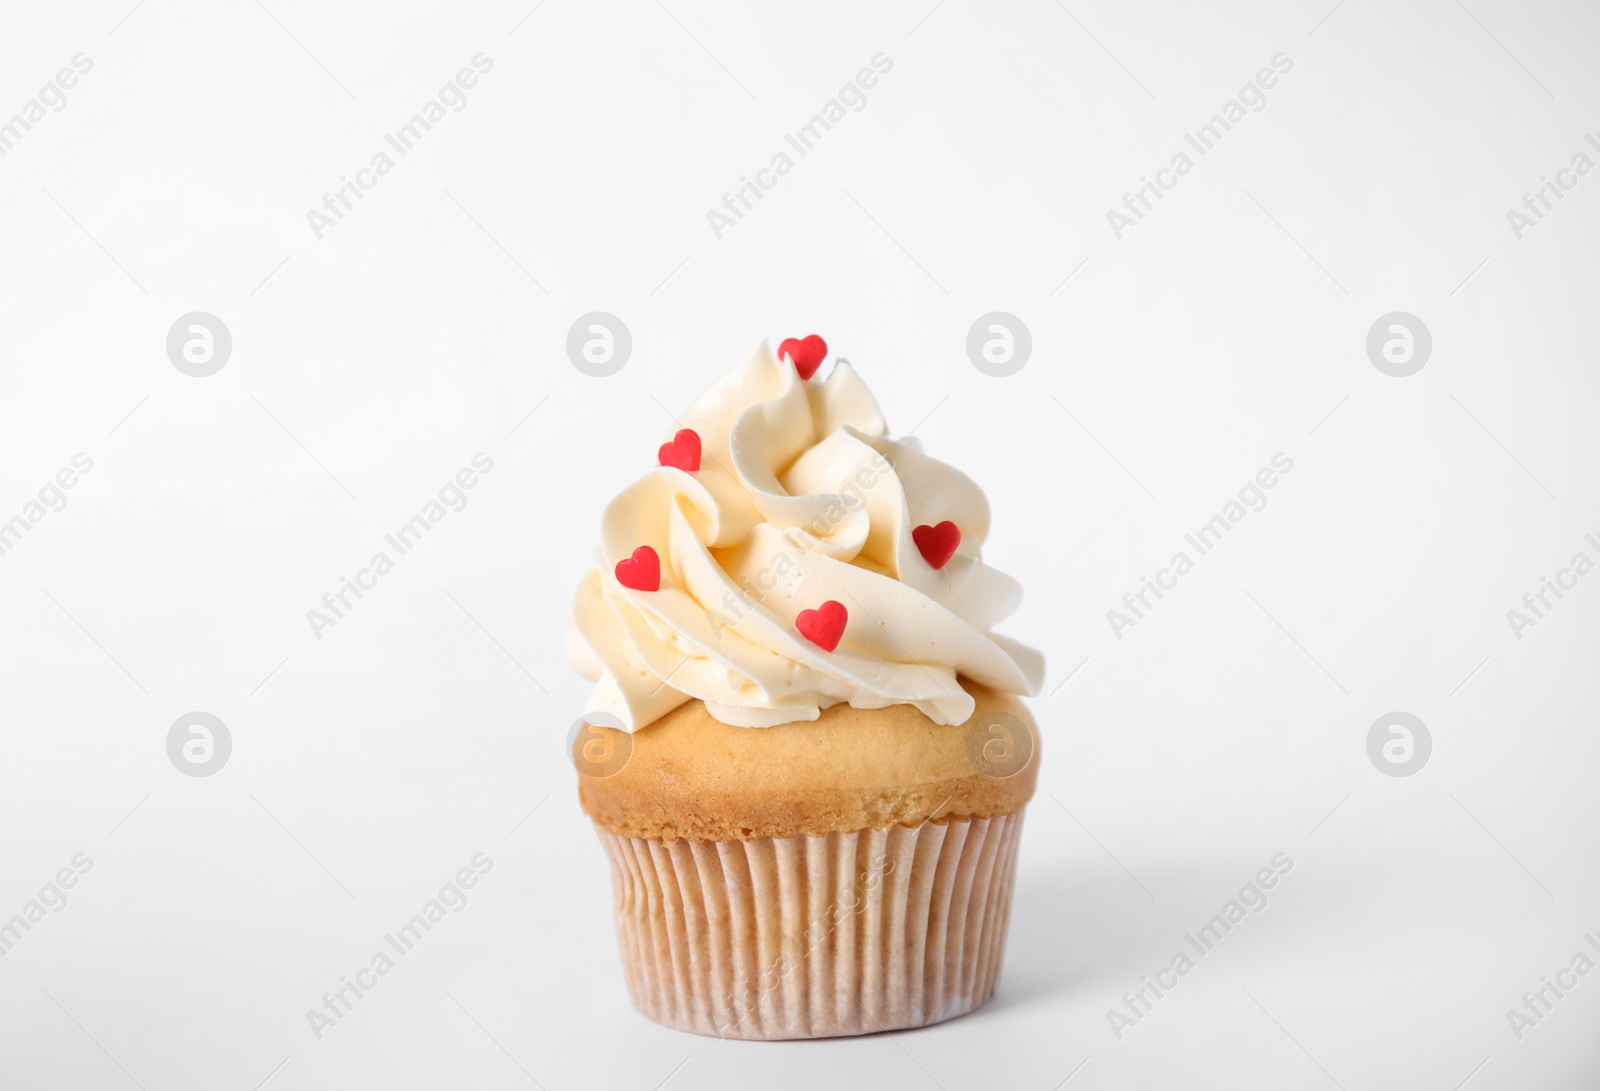 Photo of Tasty cupcake with heart shaped sprinkles for Valentine's Day on white background